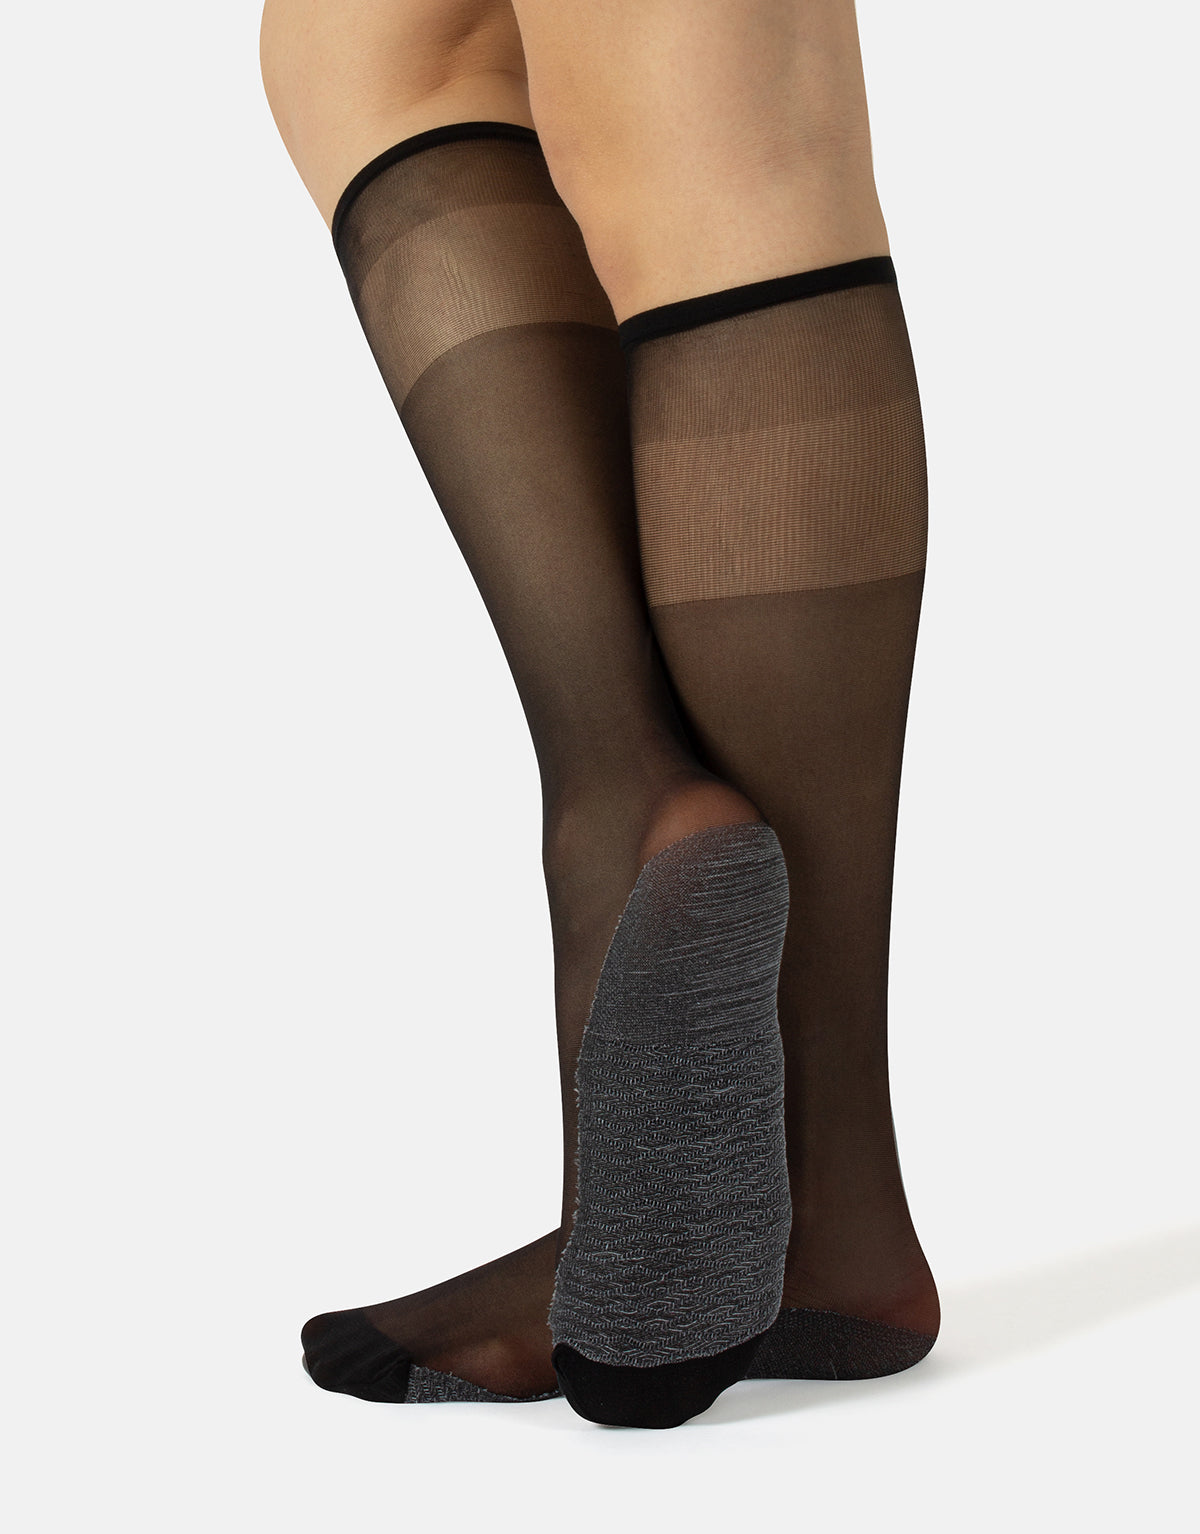 Calzitaly Cotton Massage Sole Knee-Highs - Sheer black knee-high socks with an innovative cotton sole that massages the foot giving relief and ensuring their well-being with every type of shoes. These socks also have a deep comfort cuff and reinforced toes.